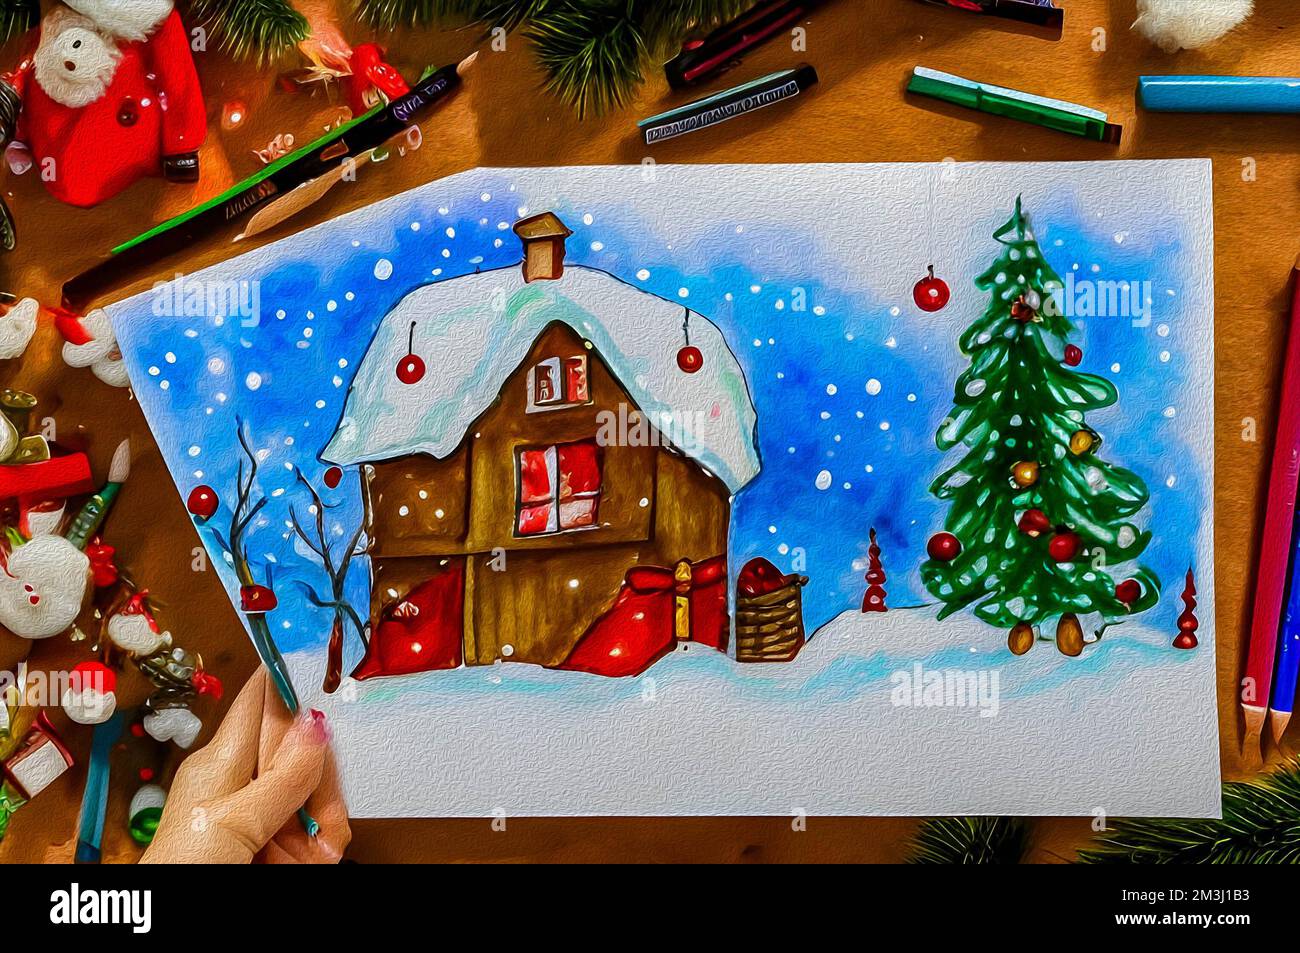 Easy Santa Claus Christmas Drawing with Oil Pastels | PrabuDbz Art - YouTube